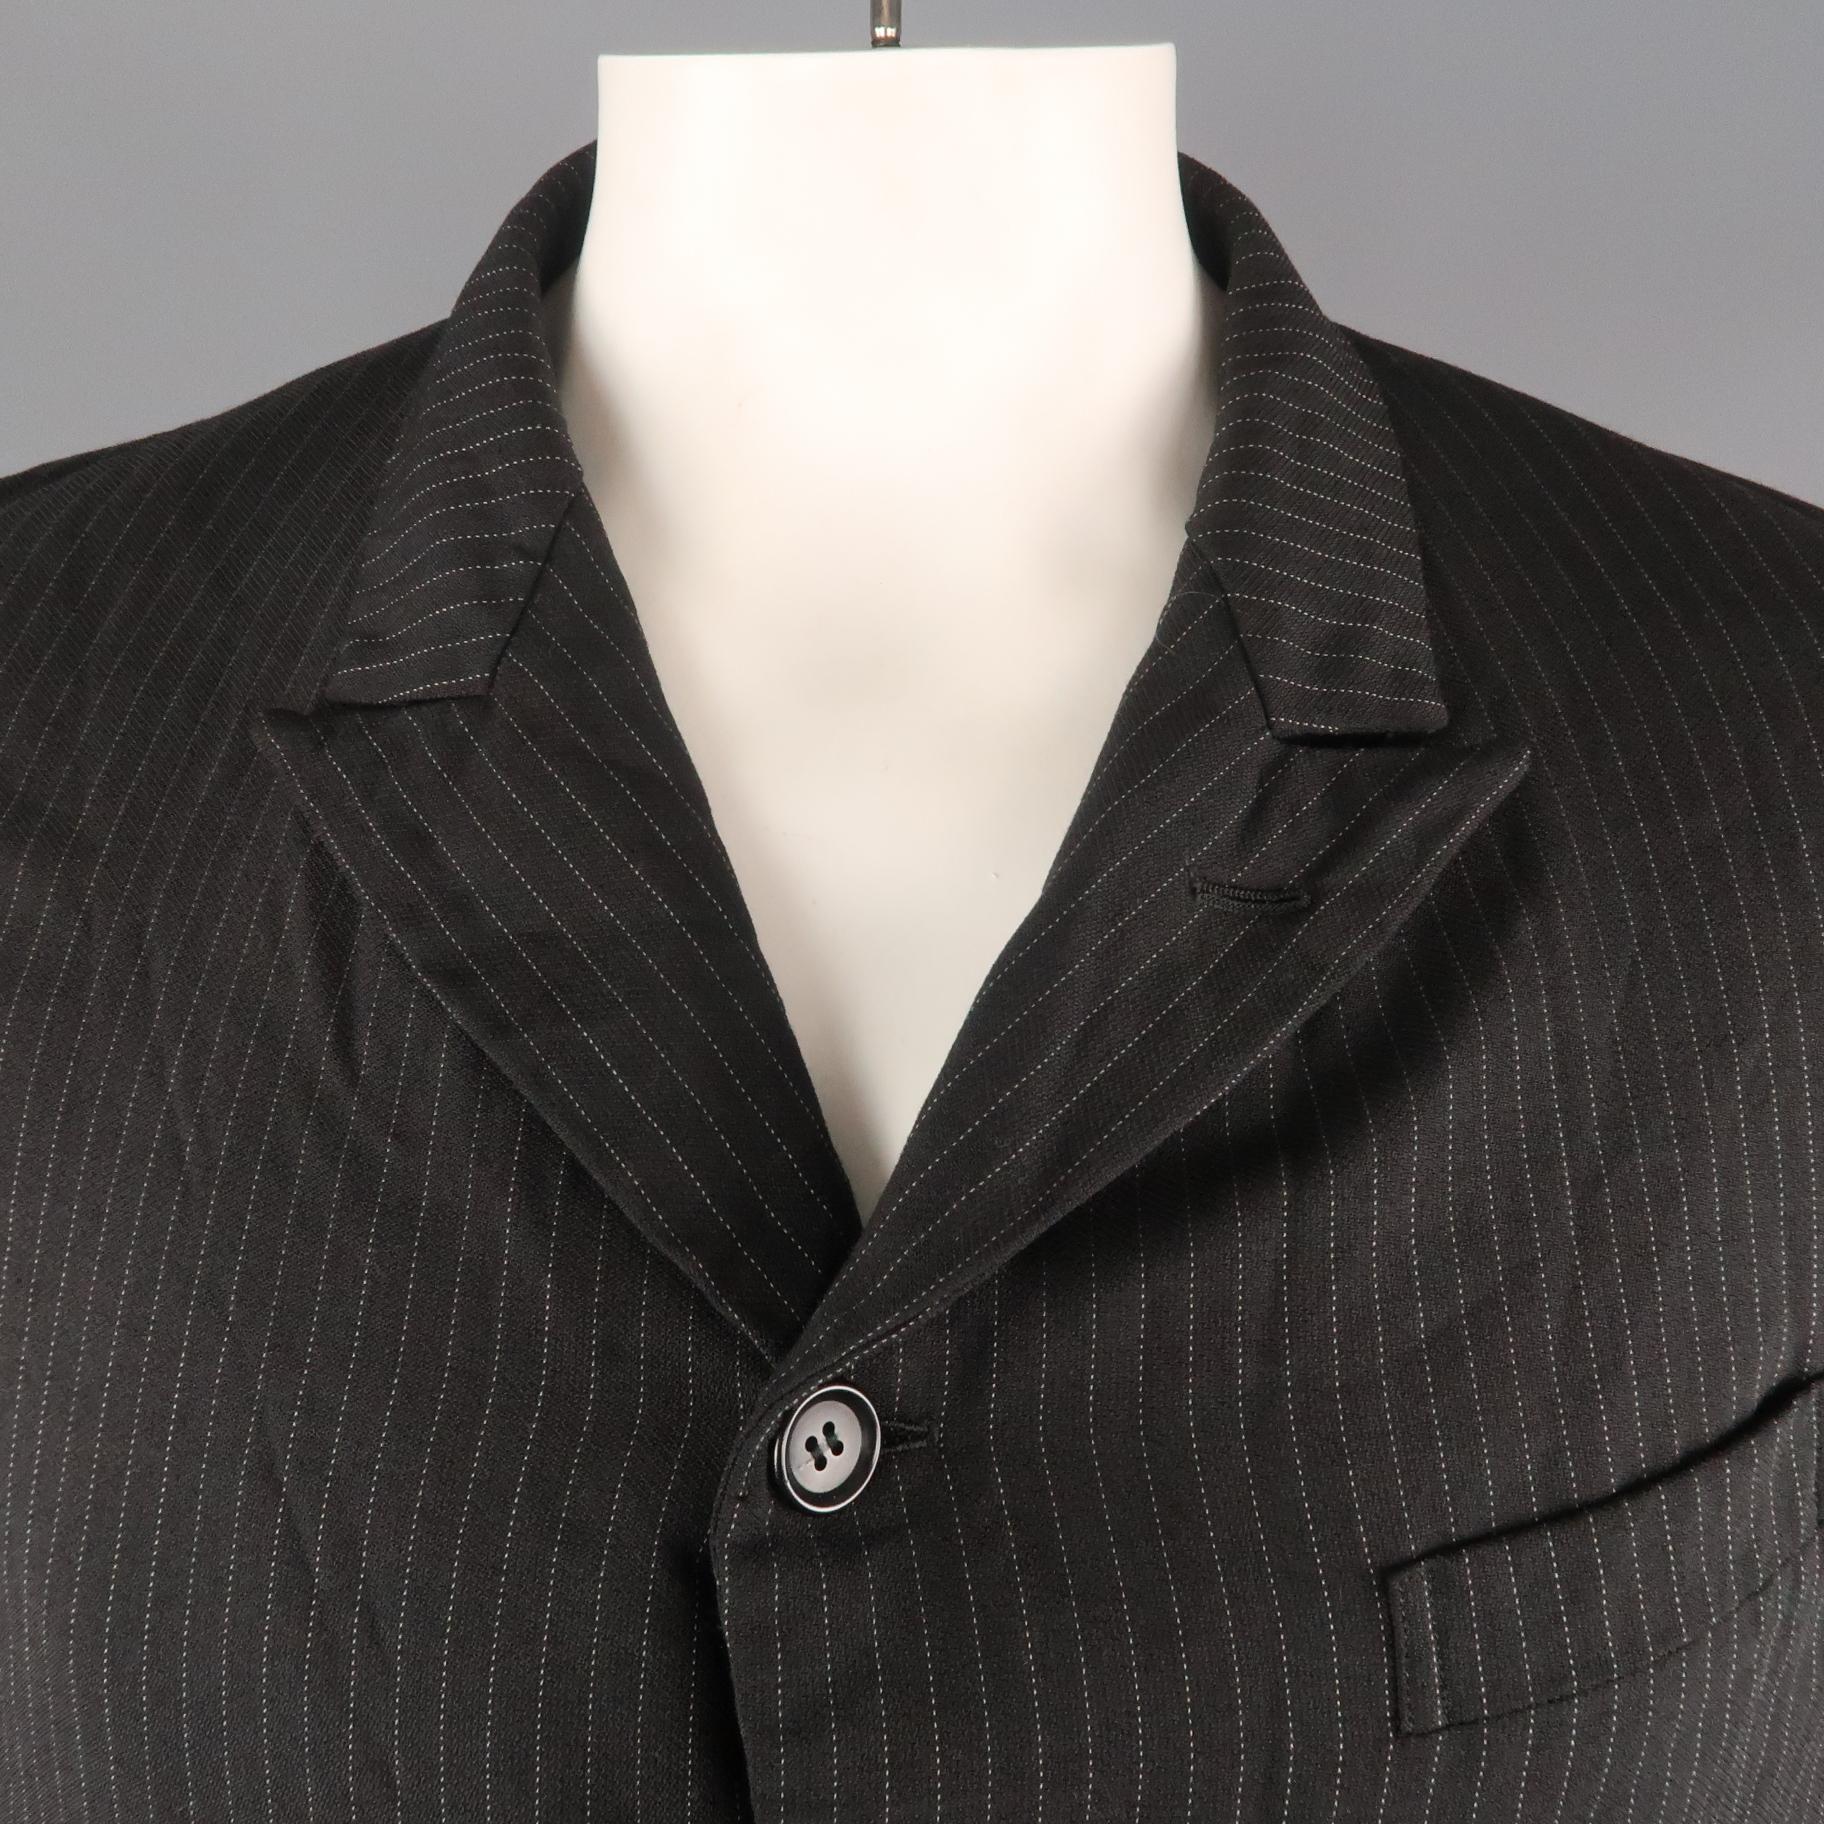 COMME des GARCONS HOMME DEUX sport jacket comes in black pinstripe wrinkle textured fabric with a peak lapel, single breasted four button front, flap pockets, and half liner. AD2017. Made in Japan.
 
Excellent Pre-Owned Condition.
Marked: L
